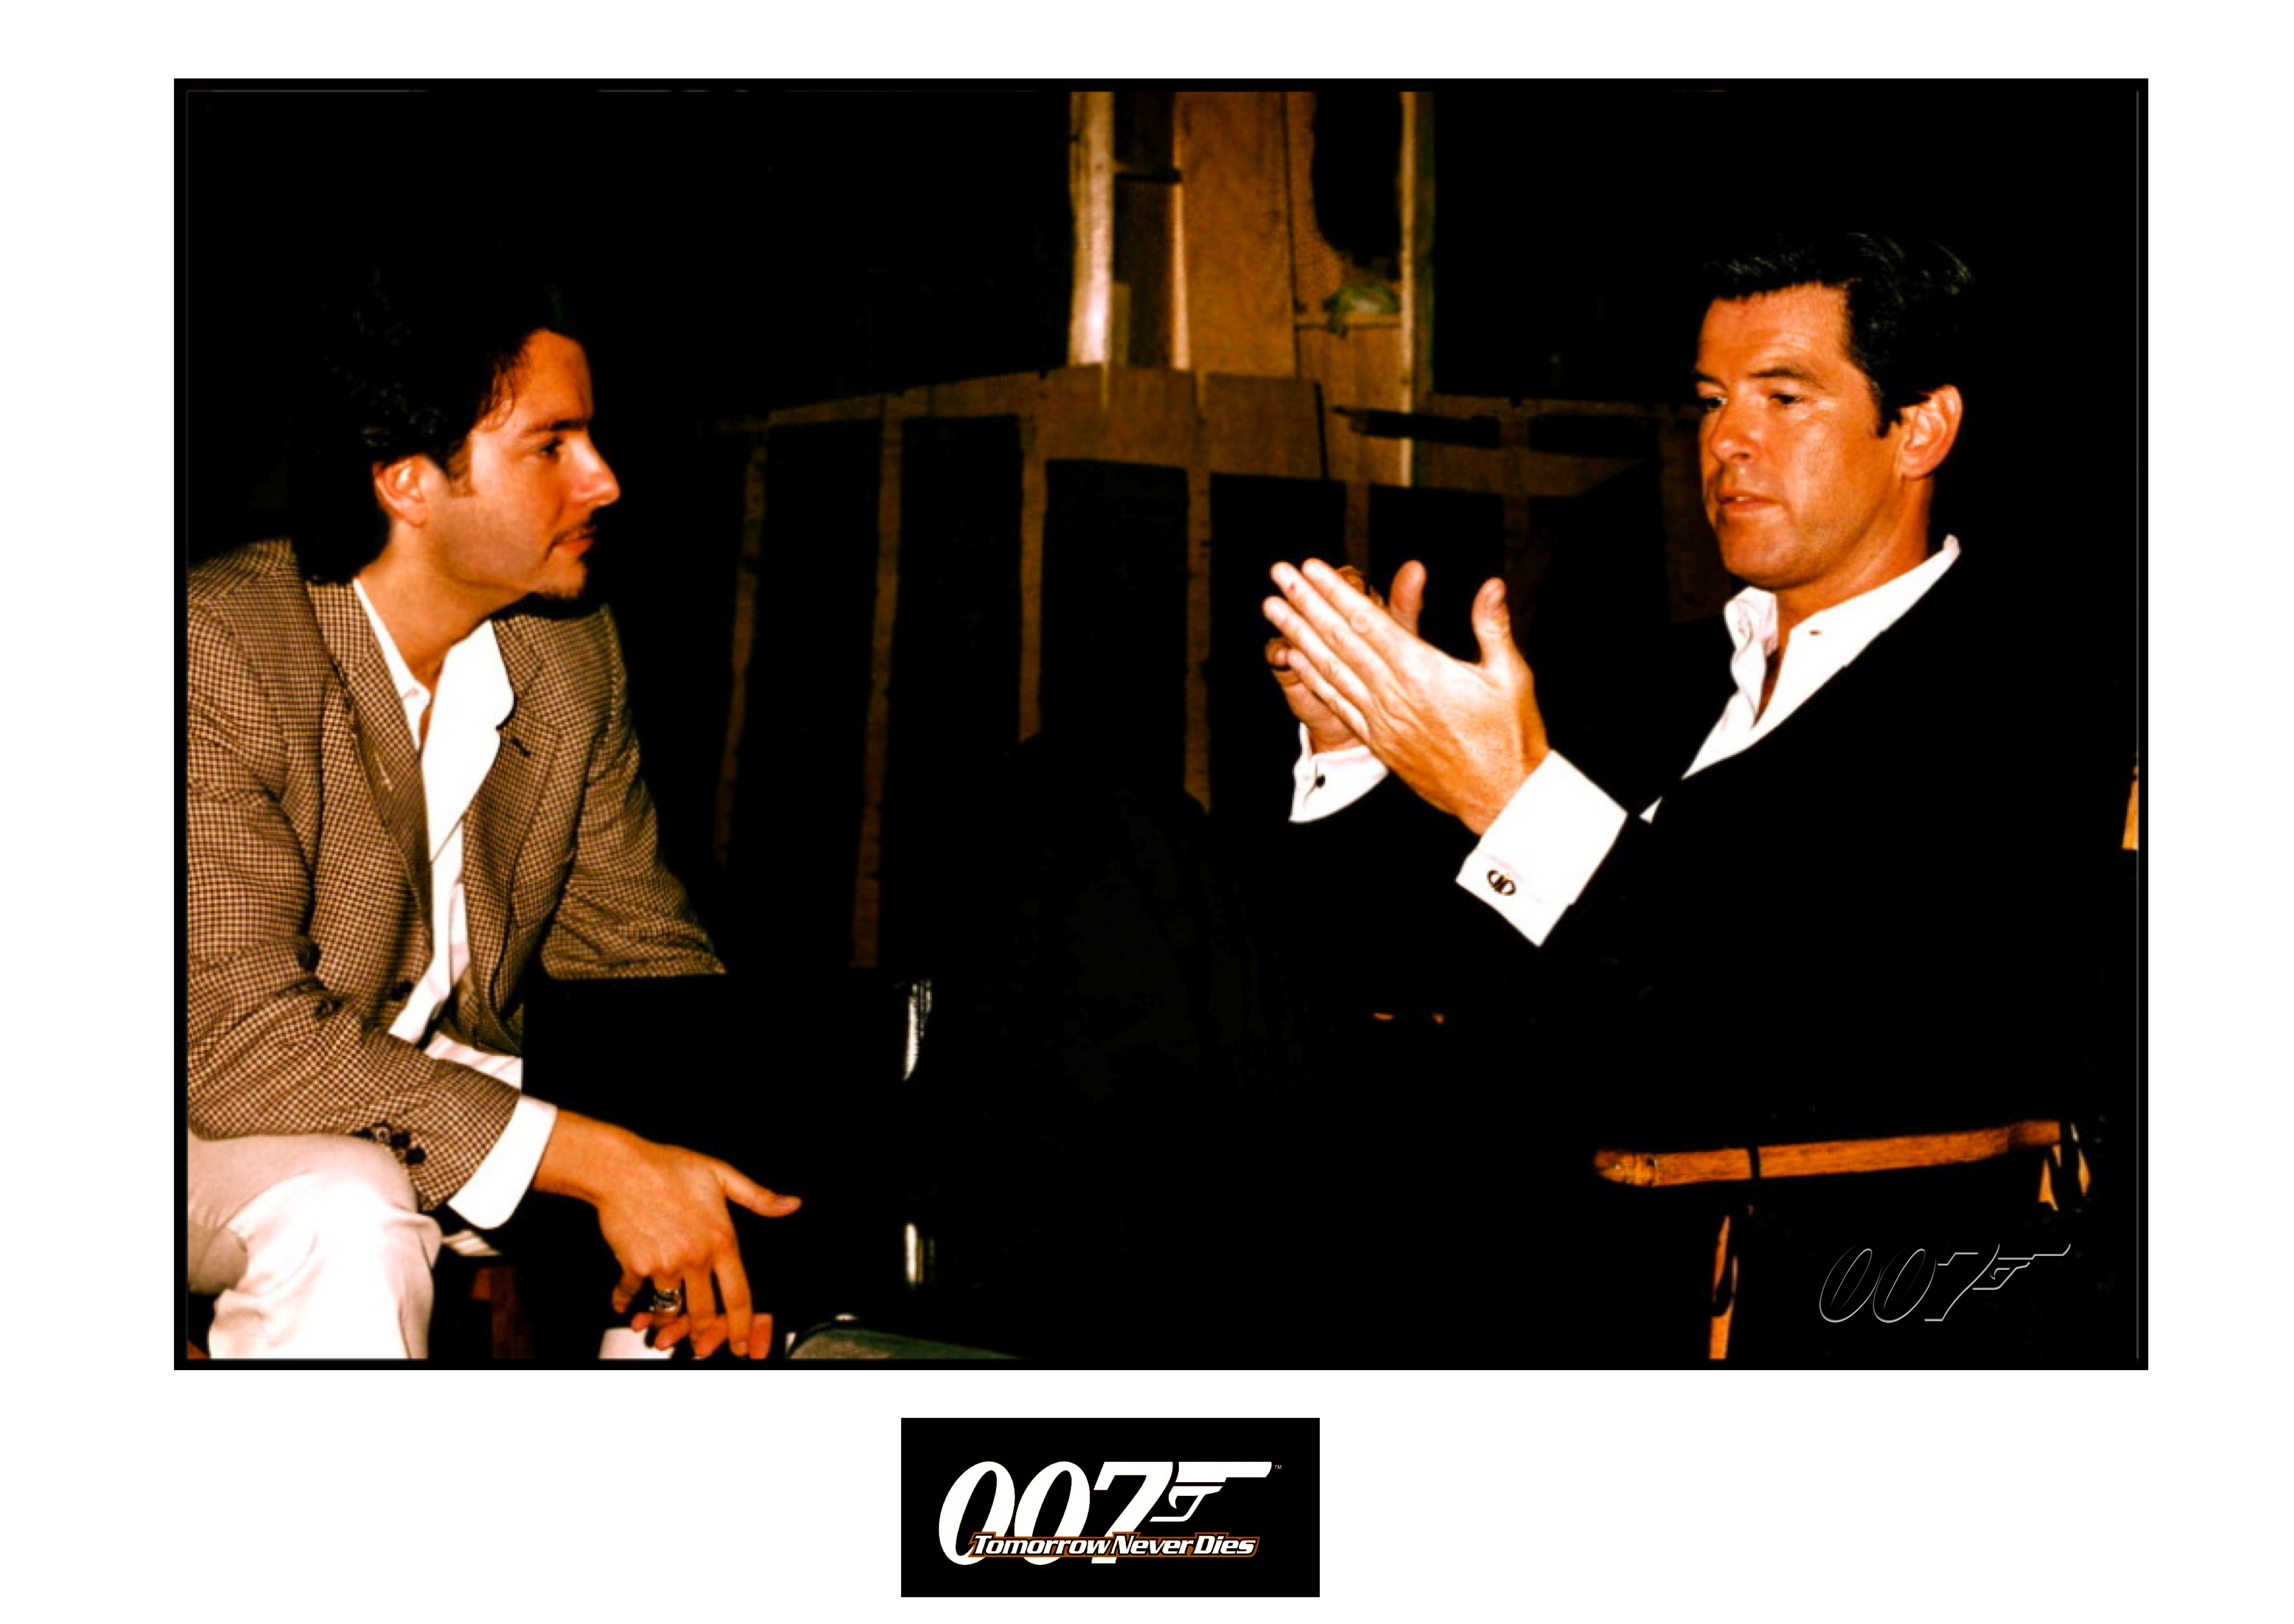 DAVID GIAMMARCO and PIERCE BROSNAN, during production of 